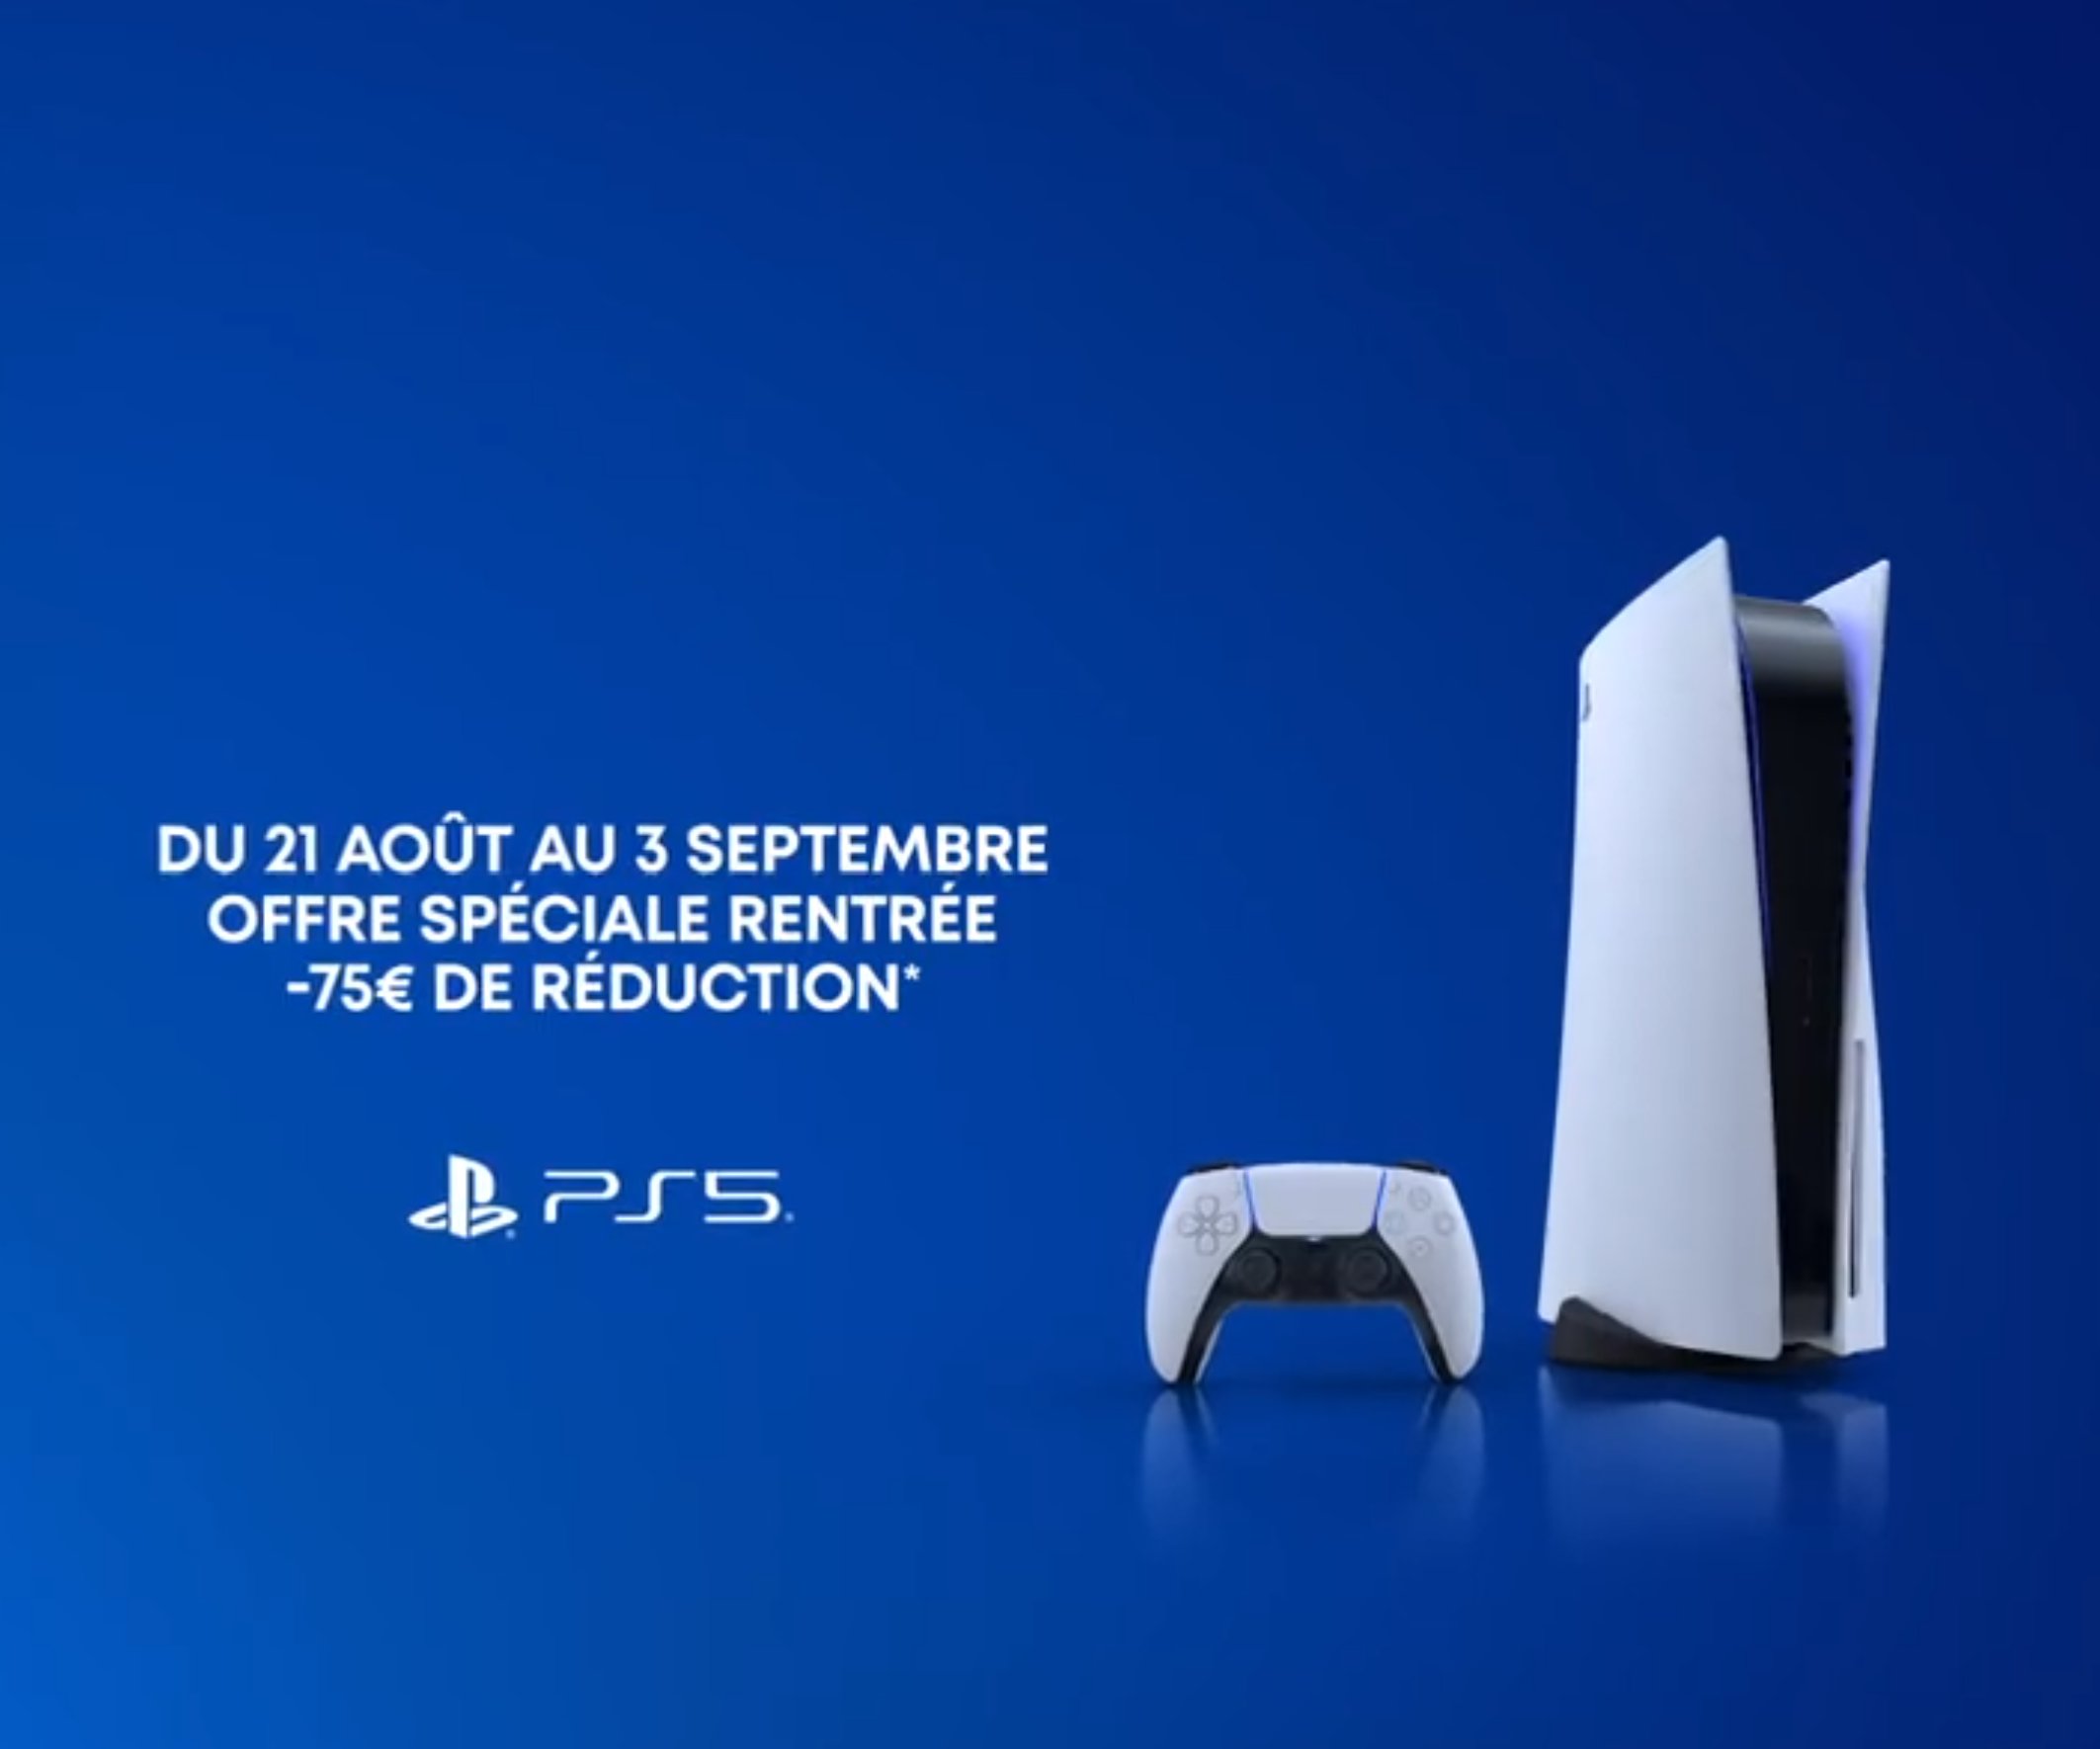 Zuby_Tech on X: PlayStation 5 Drops To €449.99 In Italy: €100 Off